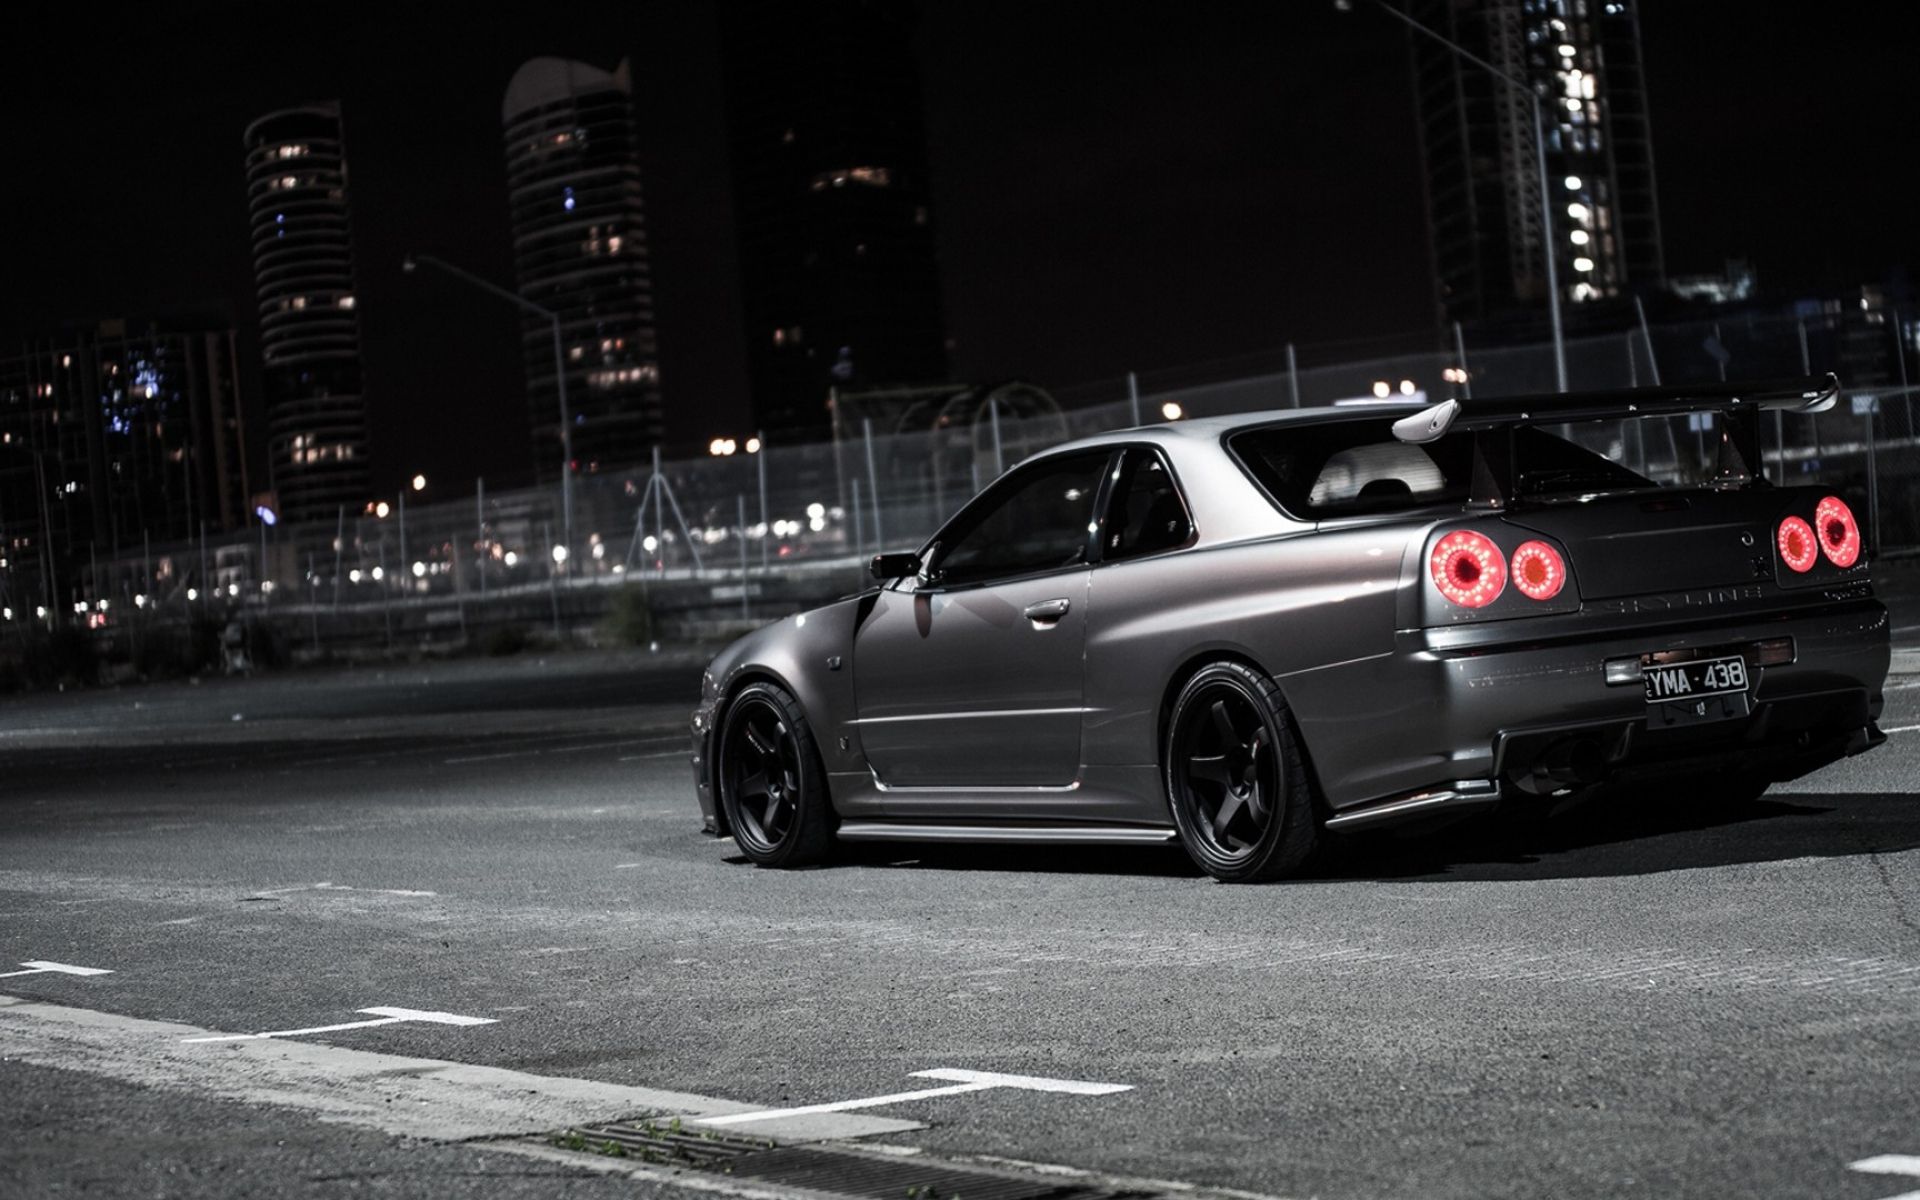  jdm japanese domestic market Wallpaper download for iPhone 5 2 2015 1920x1200